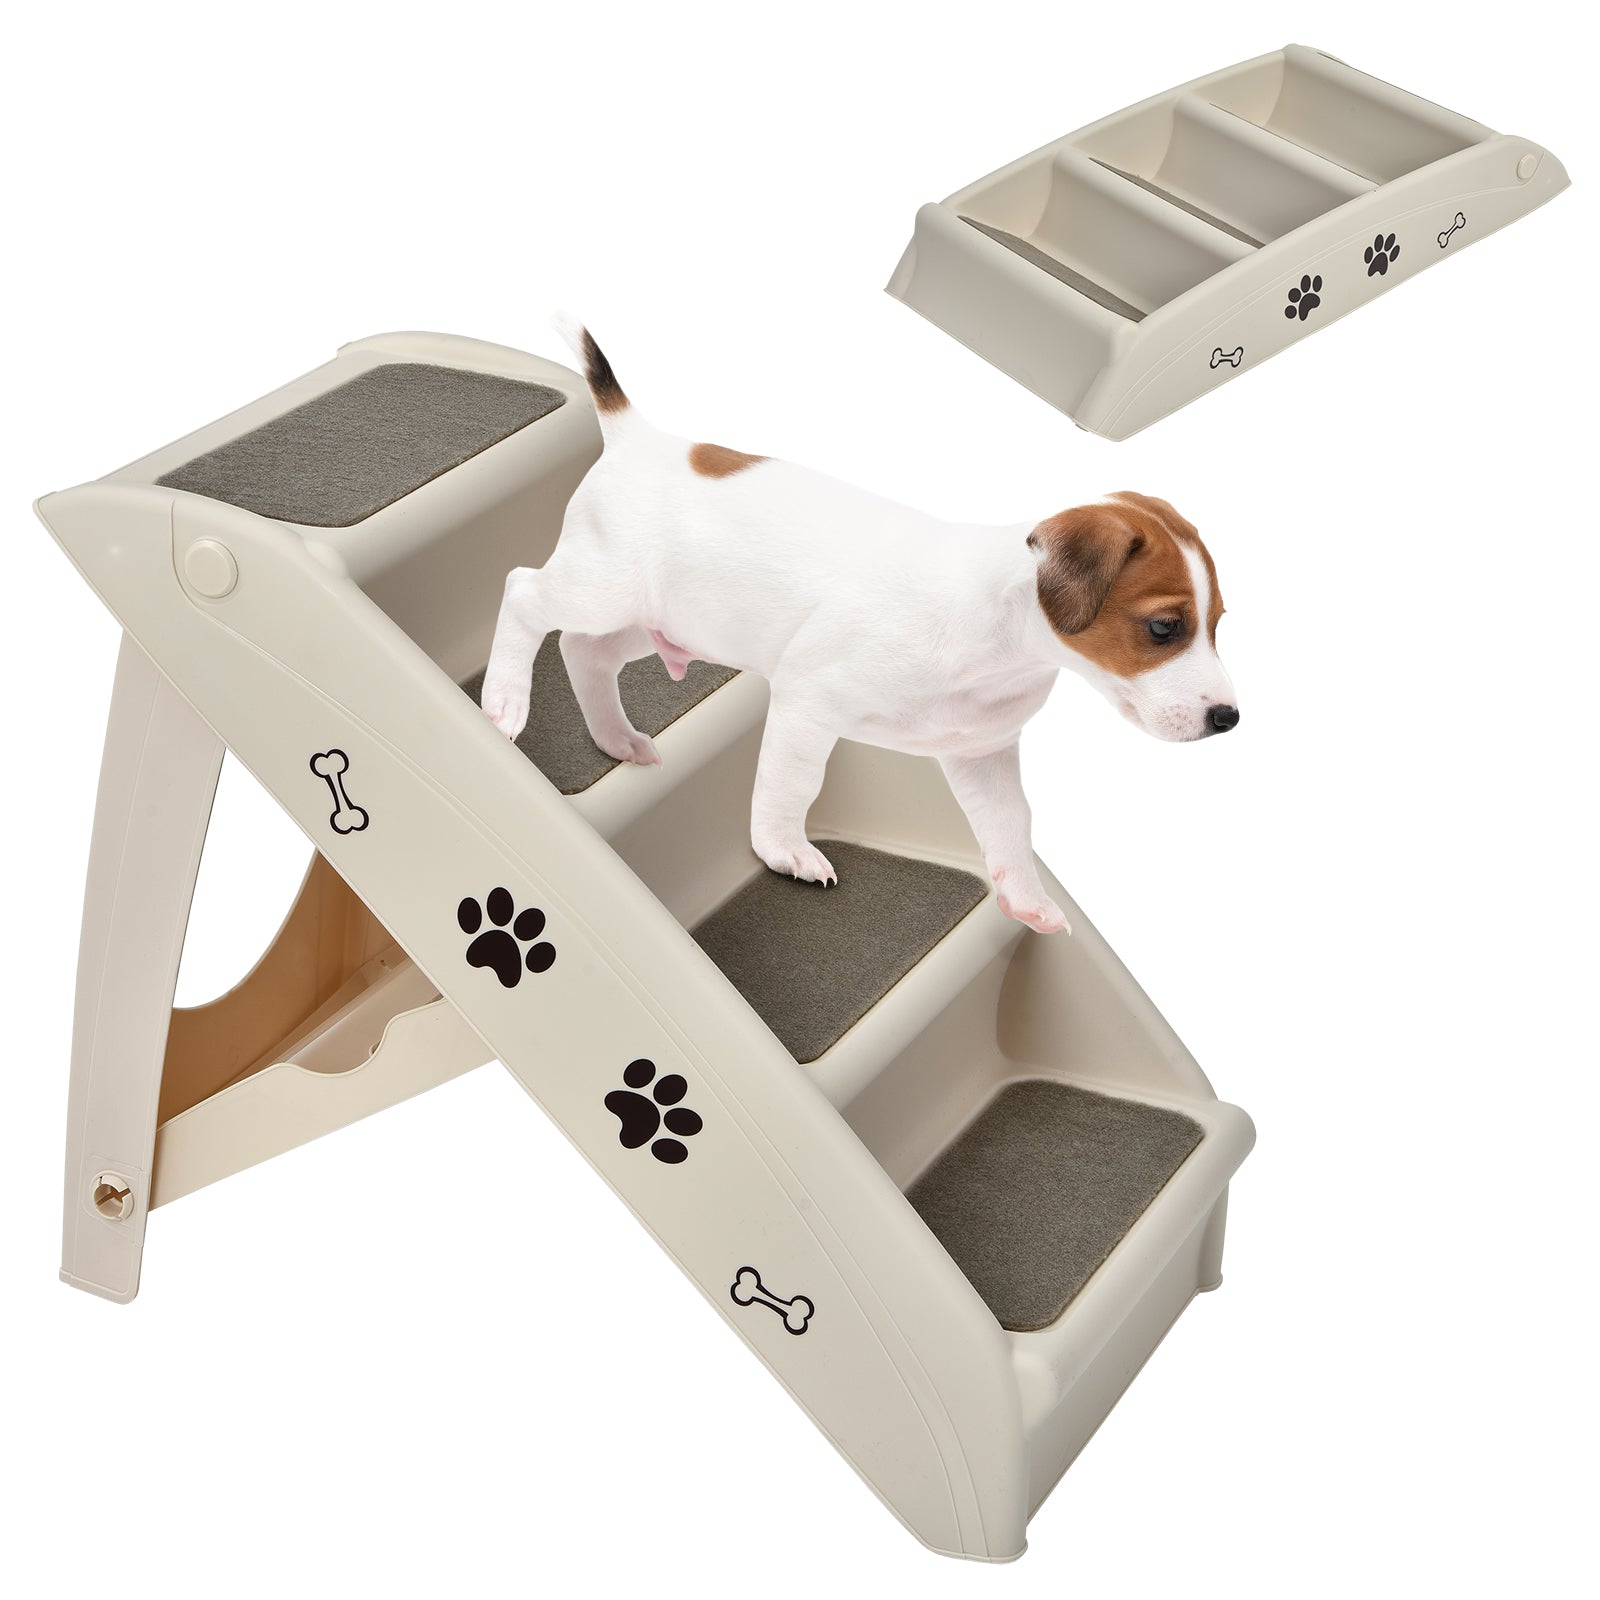 4-Step Pet Stairs with Non-slip Foot Pads-Beige